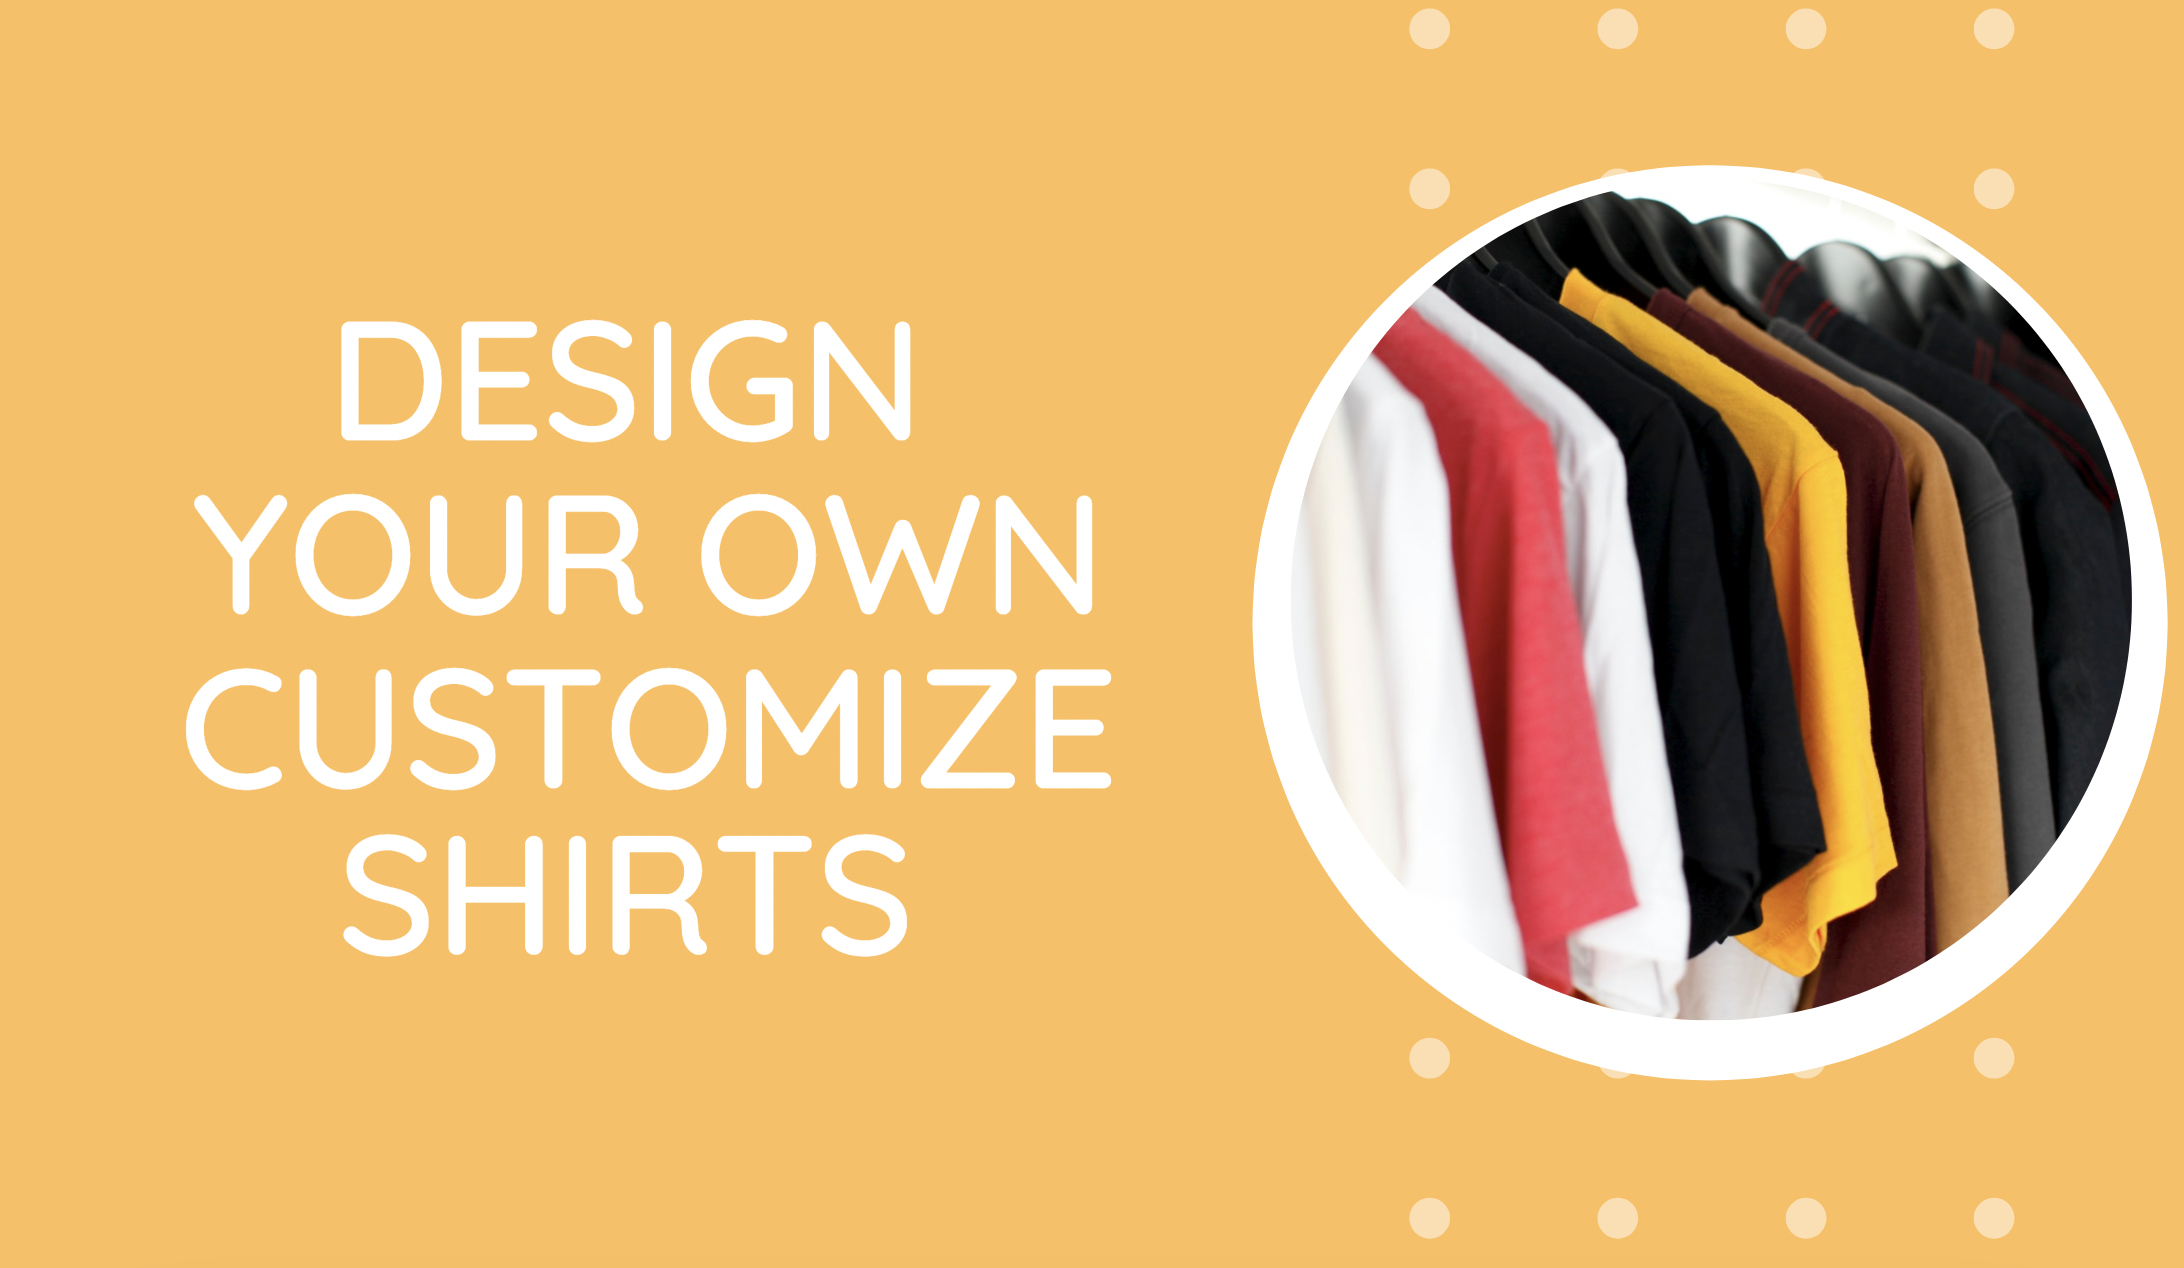 Design Your Own Customize Shirts: The Ultimate Guide